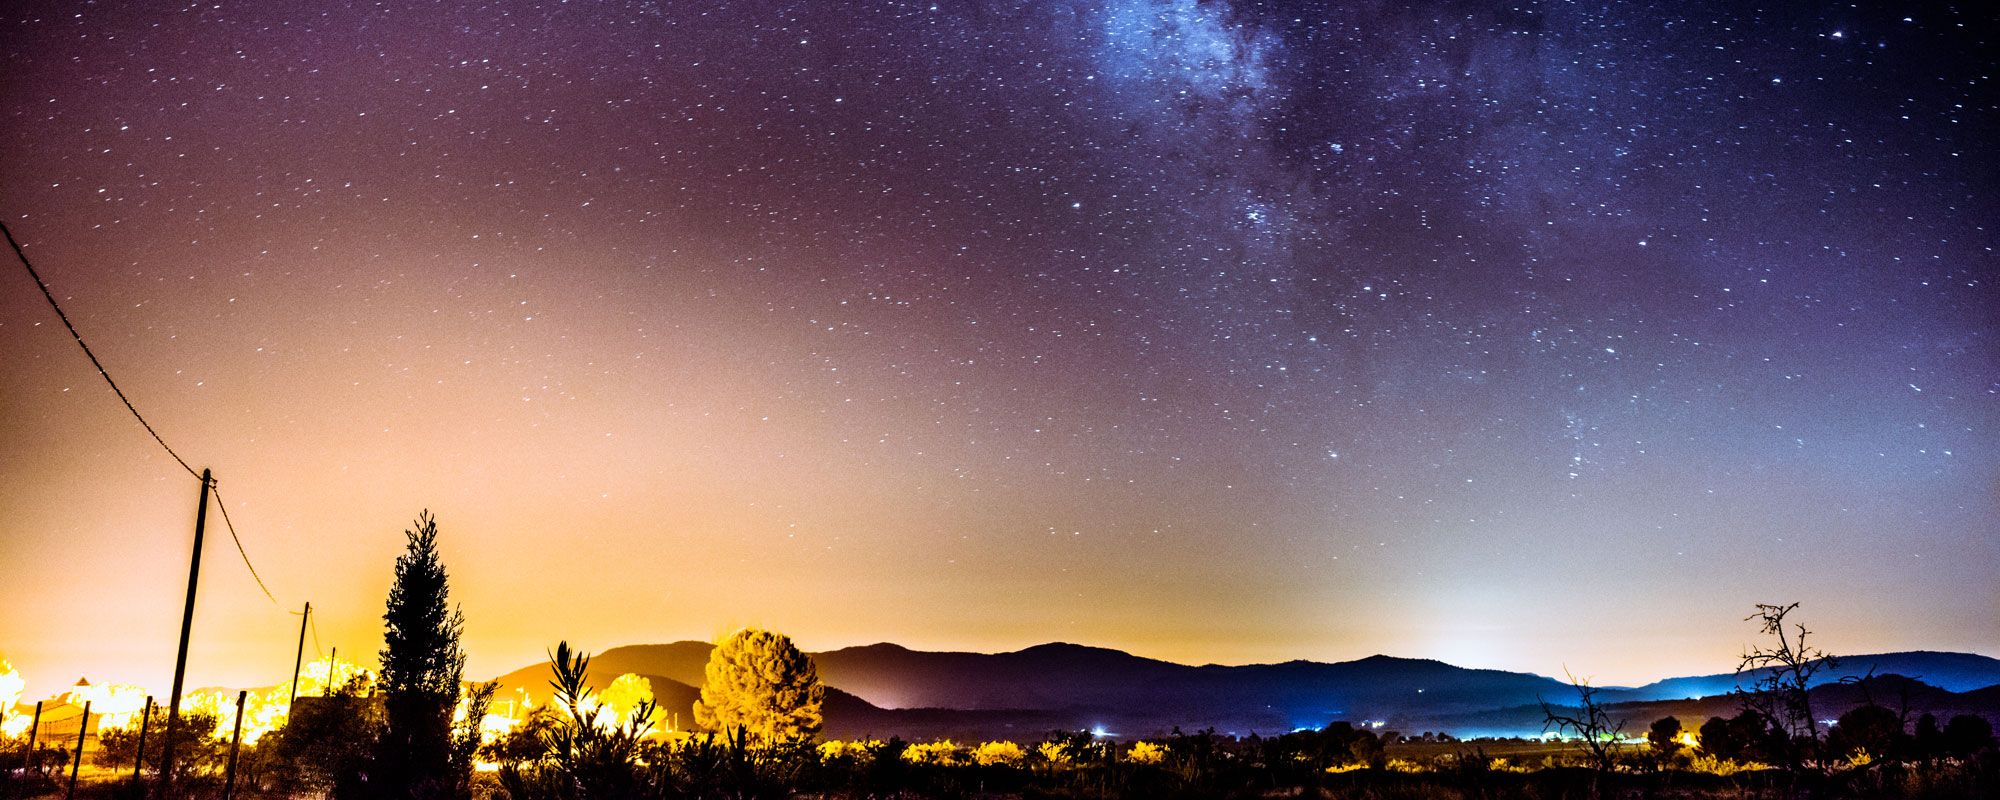 Starry night with mountains in the distance